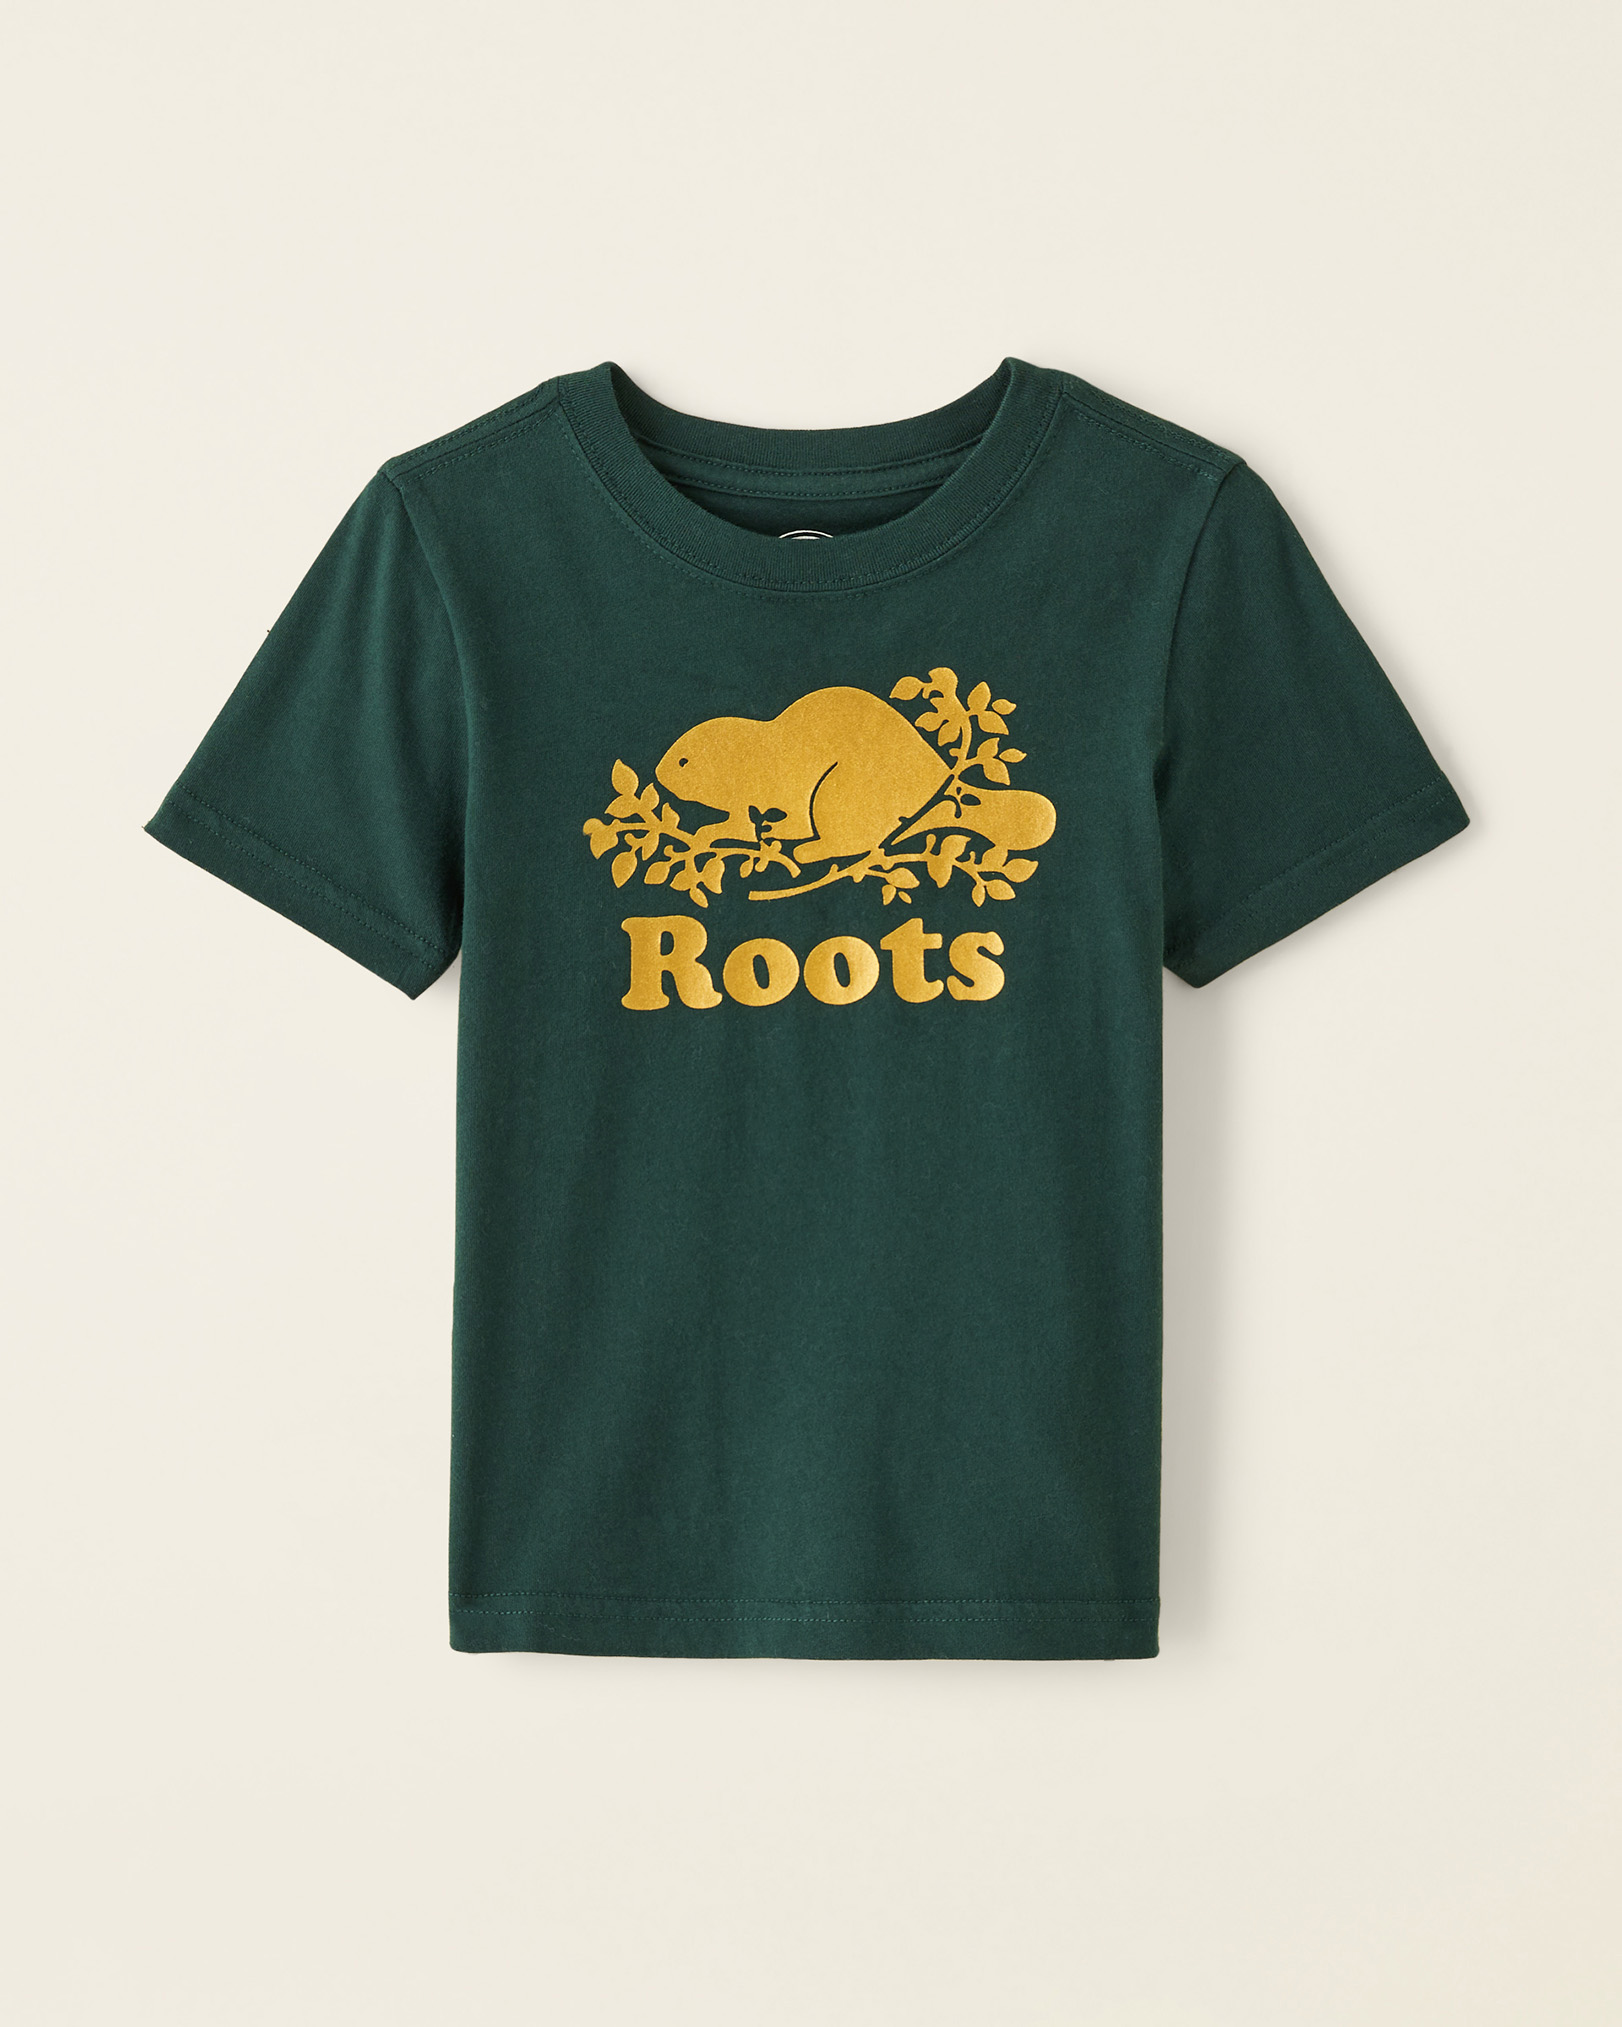 Roots Toddler 50th Cooper T-Shirt in Varsity Green